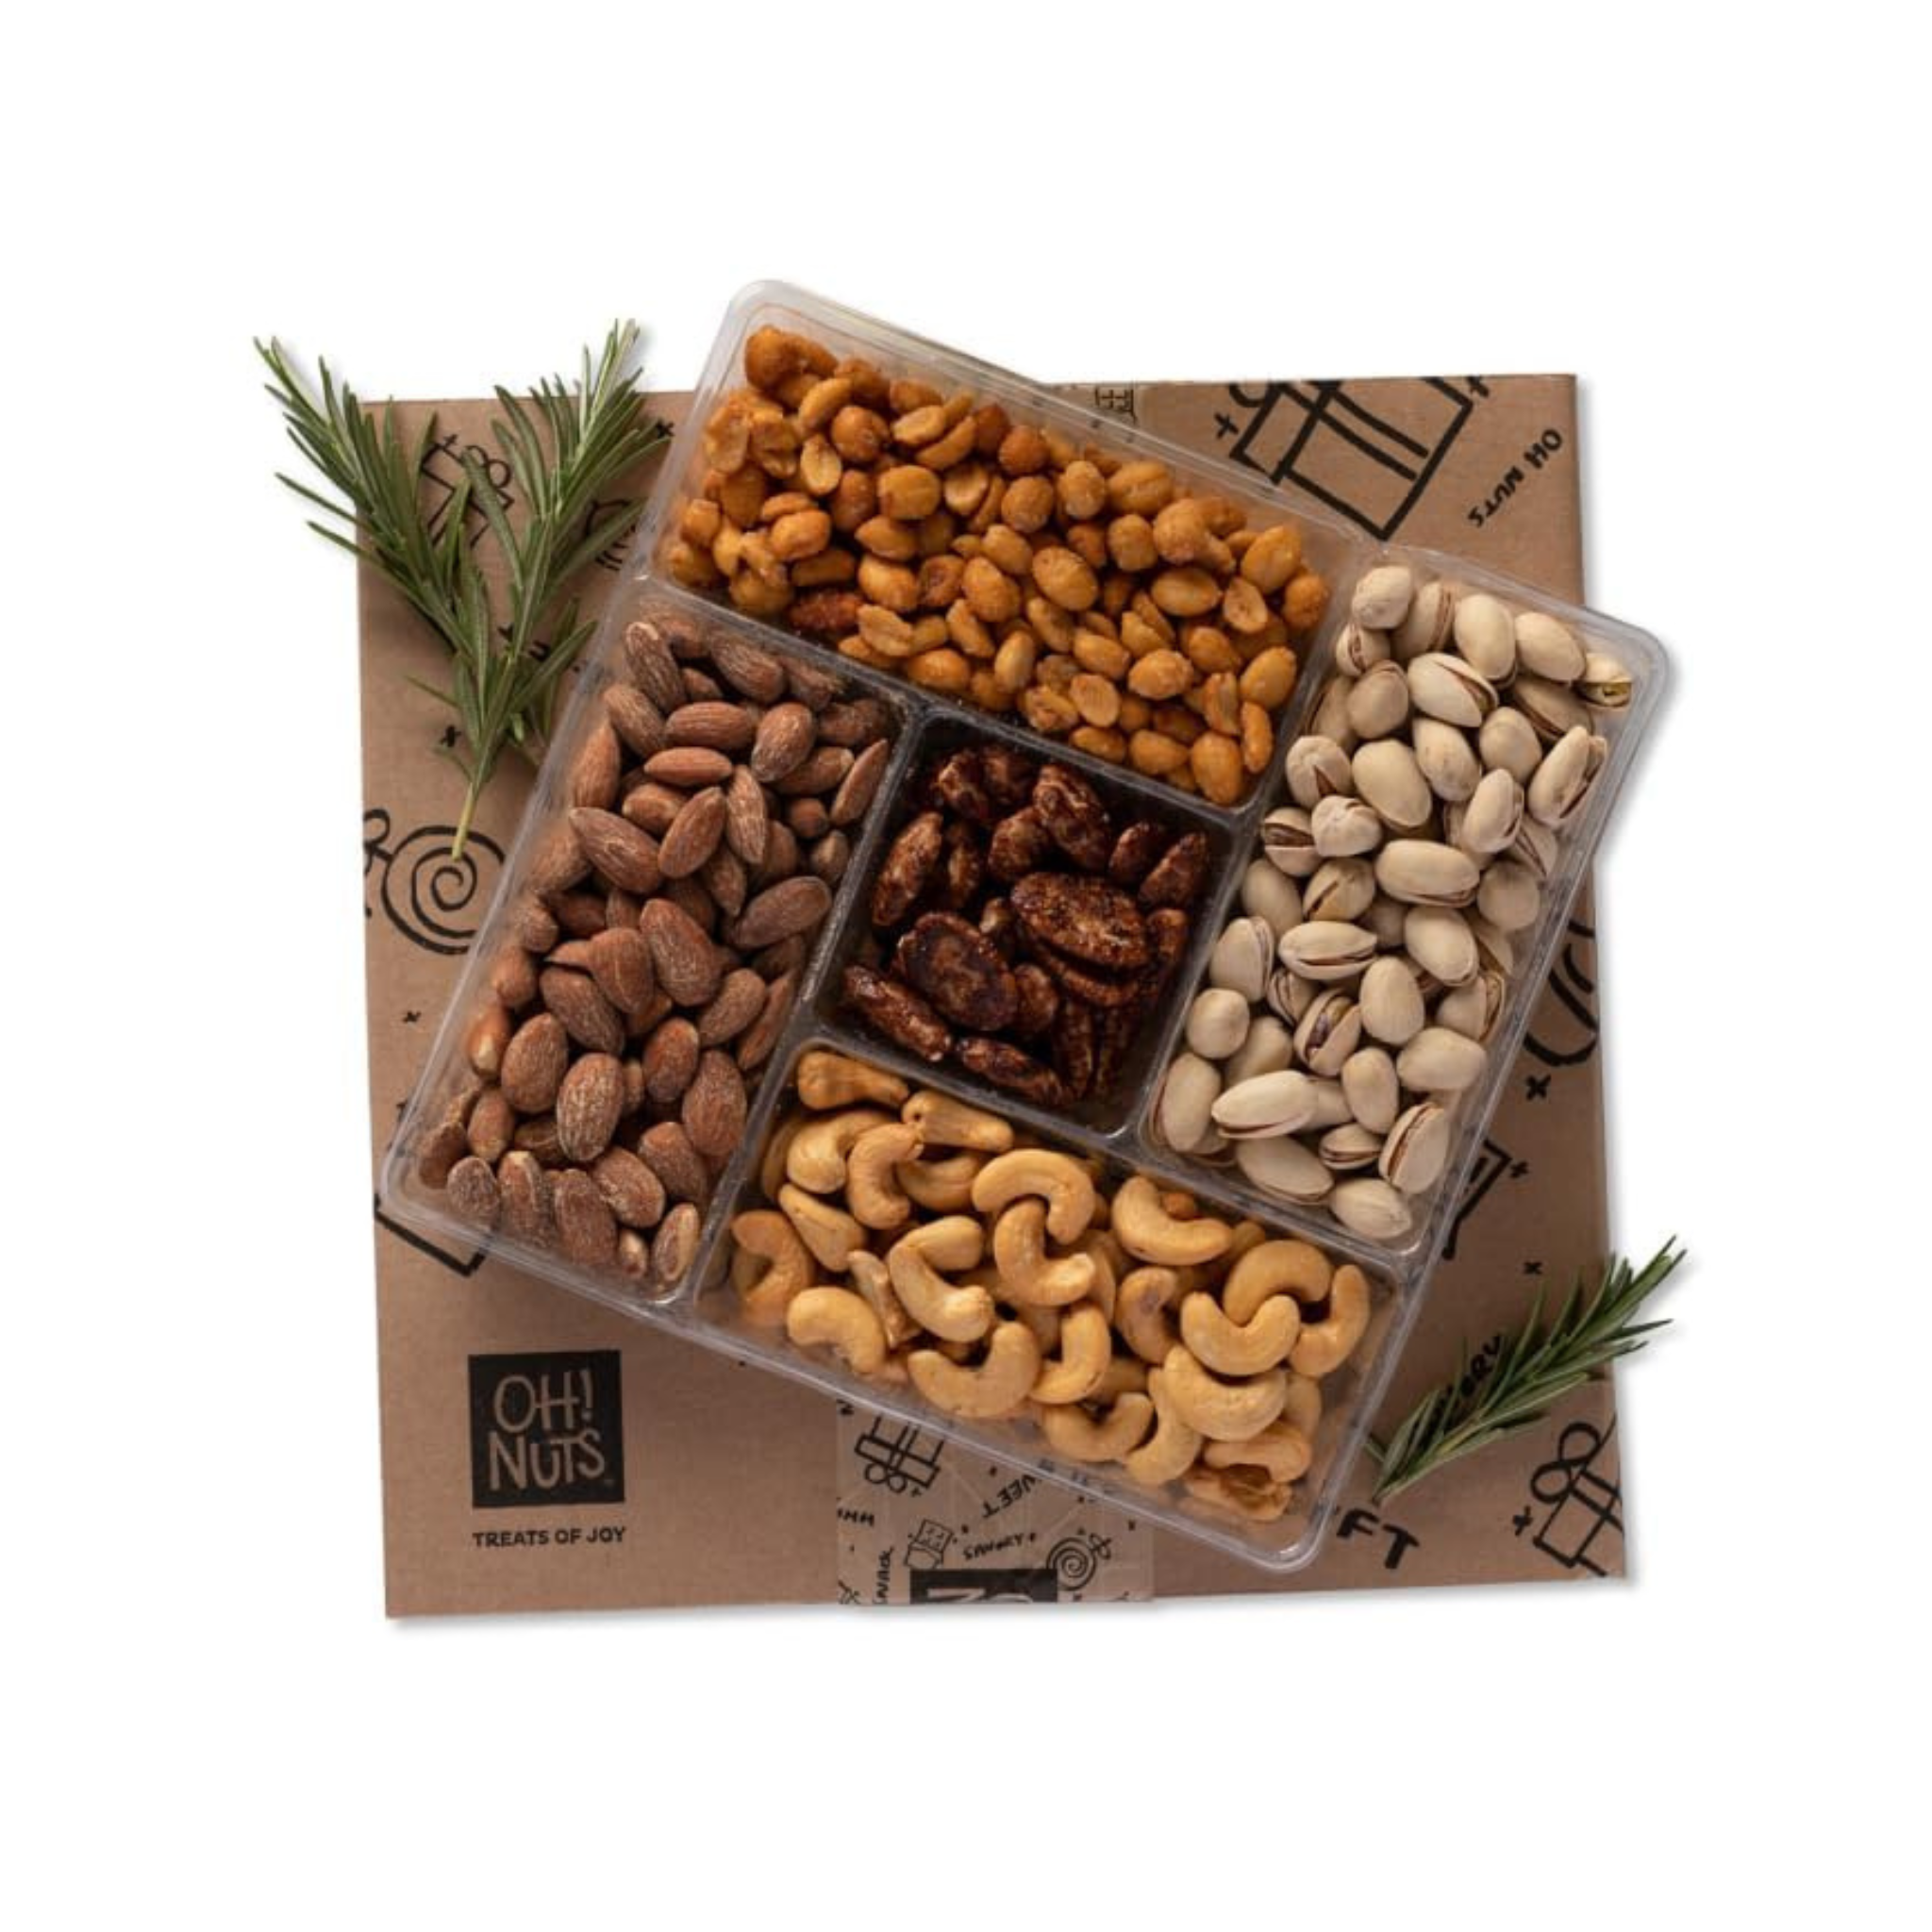 Save Up To 50% on Oh! Nuts Fruits and Nut Gifts!